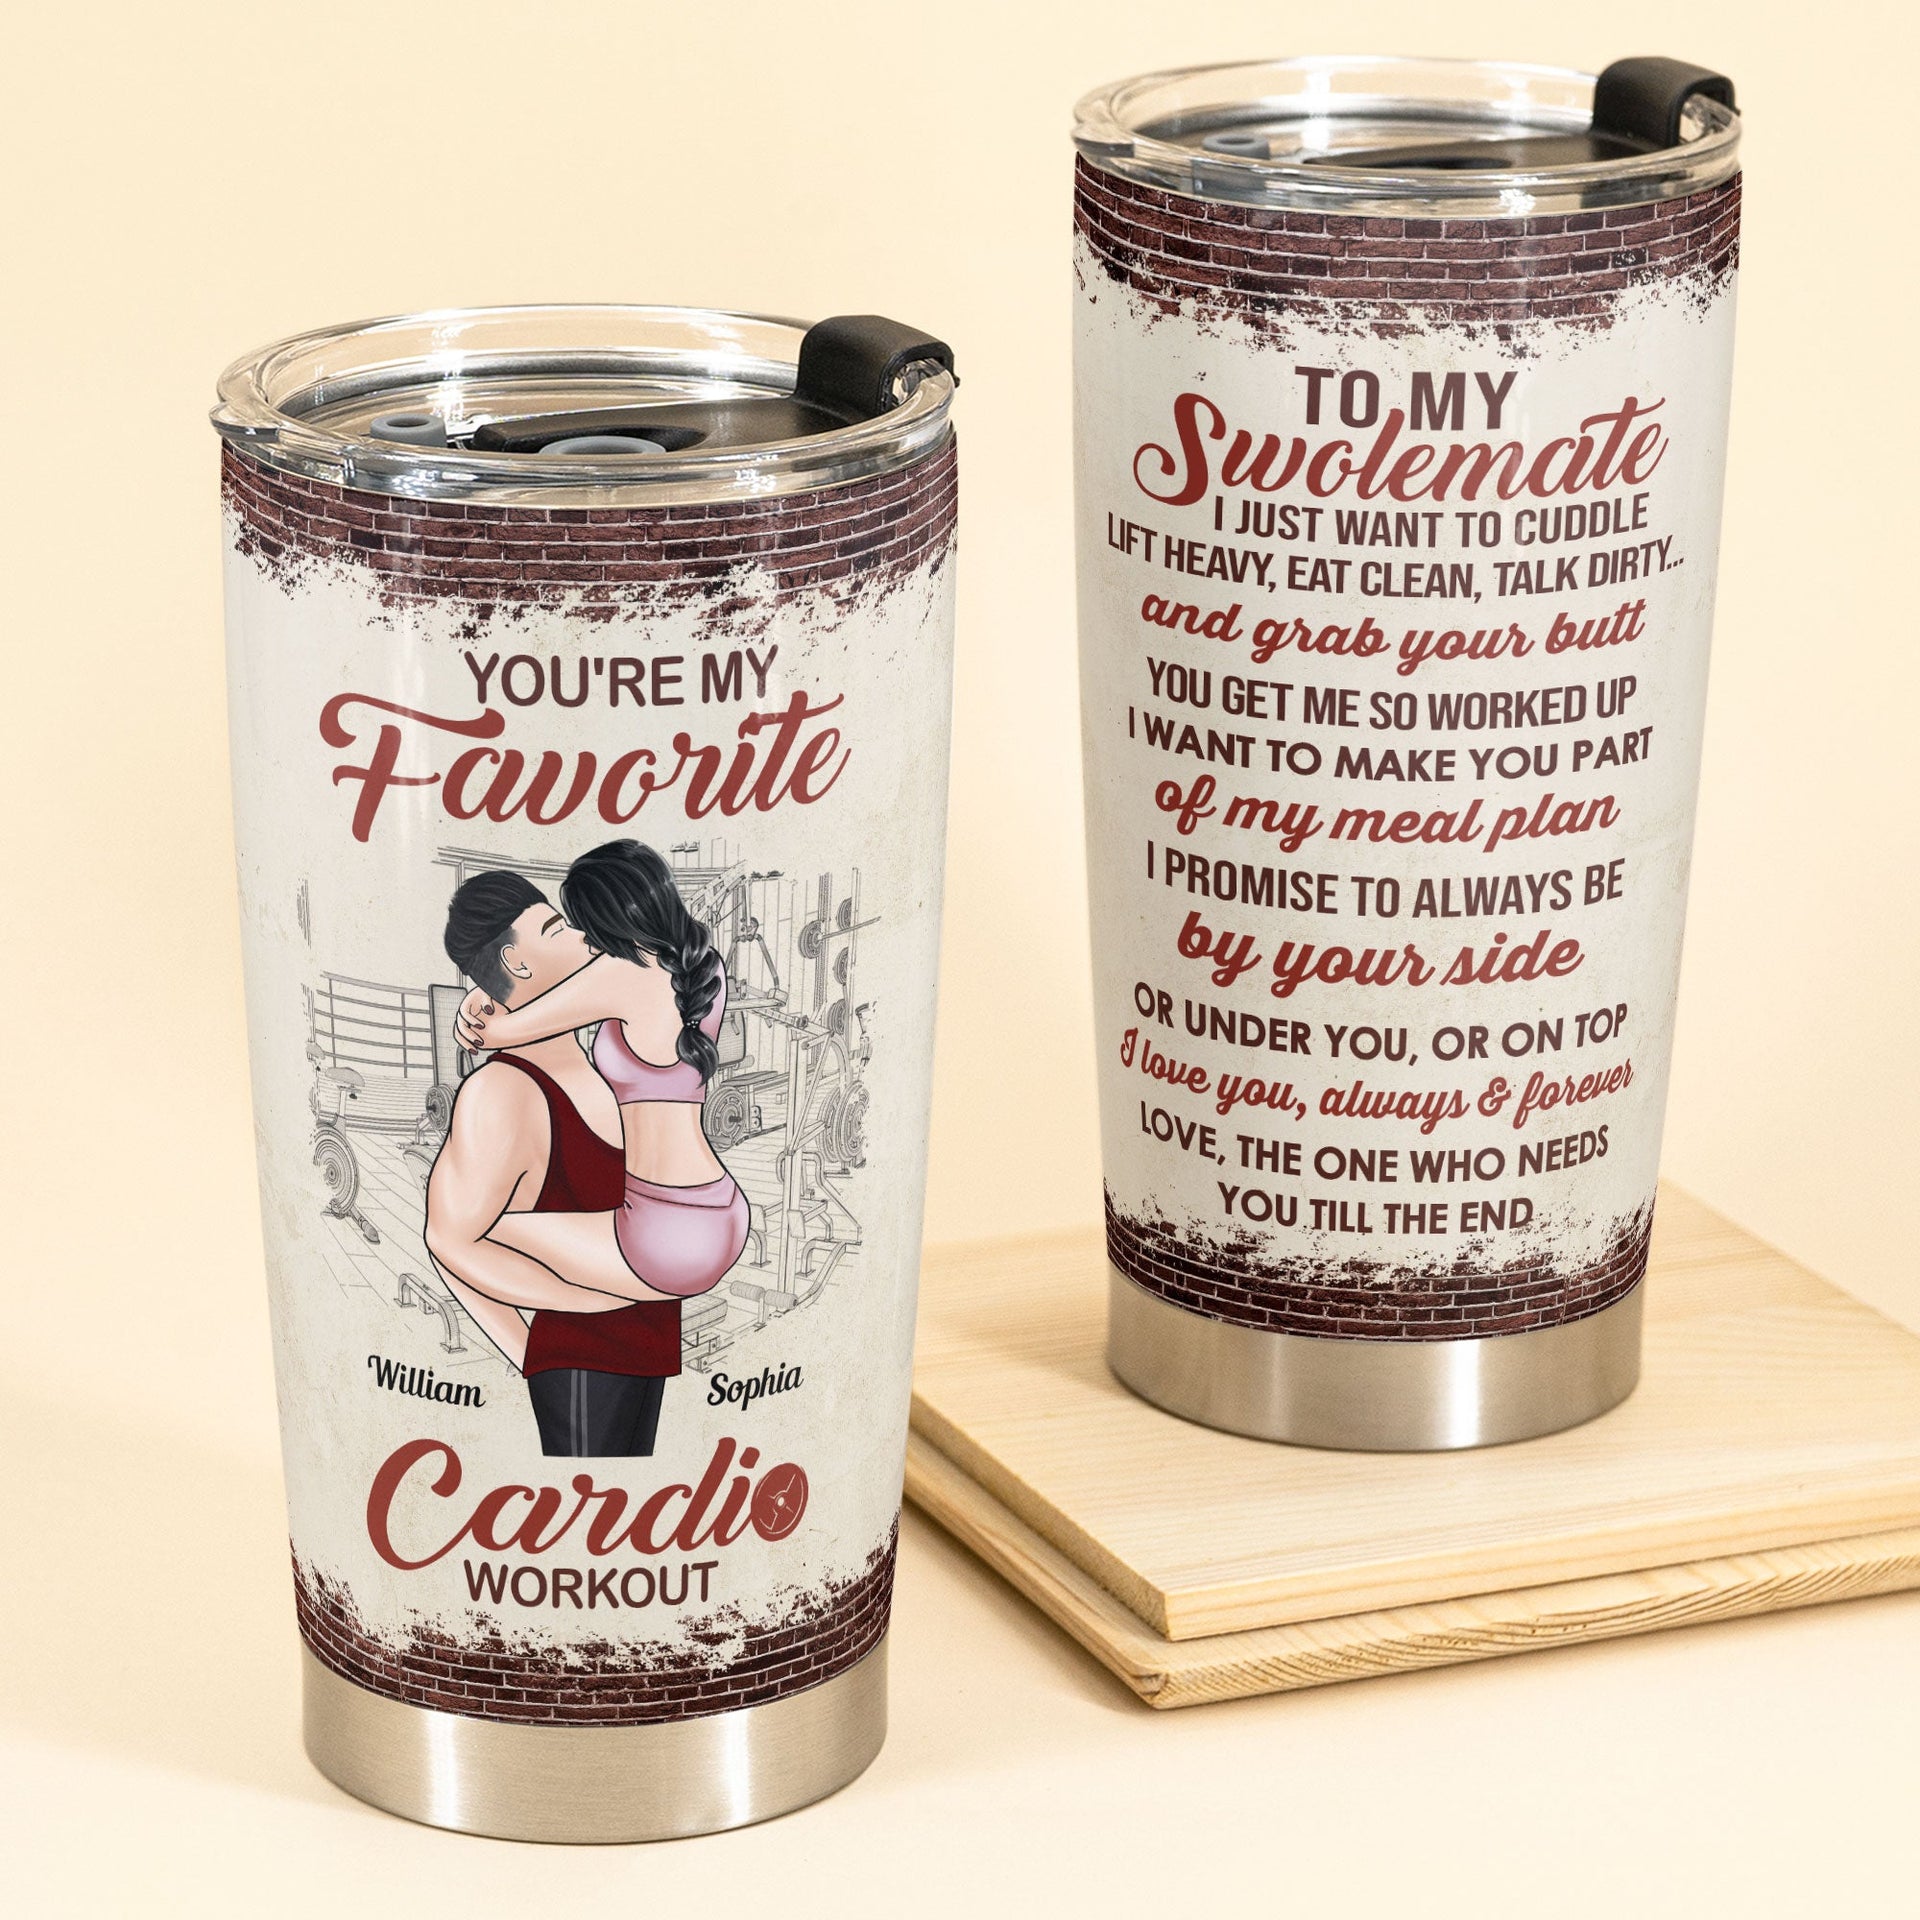 https://macorner.co/cdn/shop/products/YouRe-My-Favorite-Cardio-Workout-Personalized-Tumbler-Cup-Birthday-Loving-Gift-For-Gym-couple-Lover-Husband-Wife-1.jpg?v=1656411960&width=1920